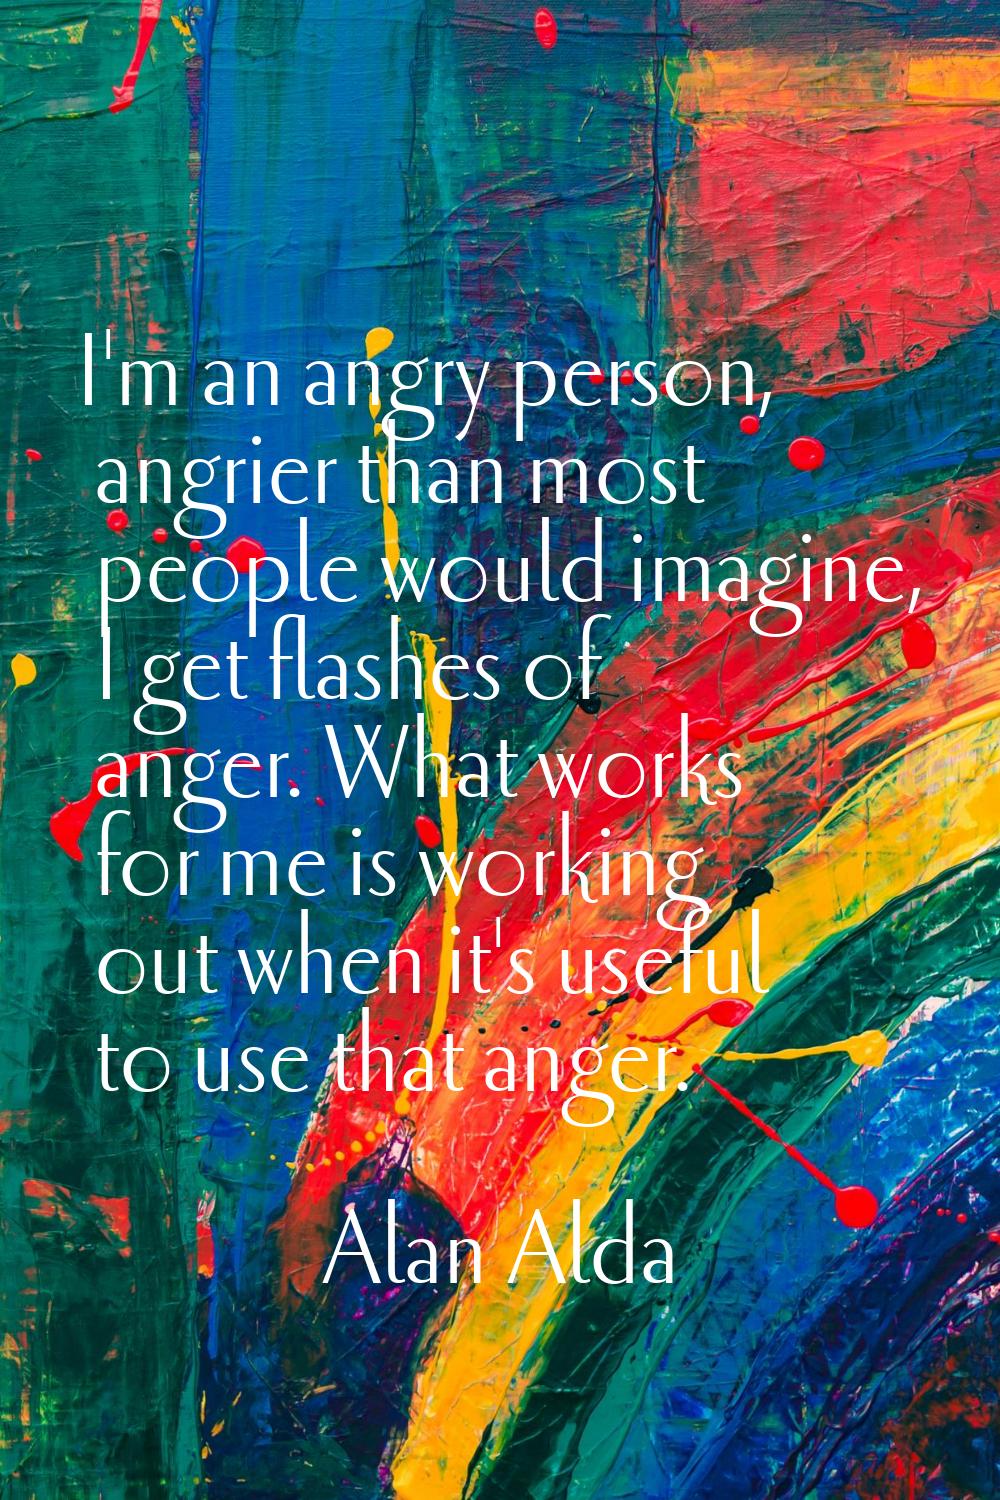 I'm an angry person, angrier than most people would imagine, I get flashes of anger. What works for